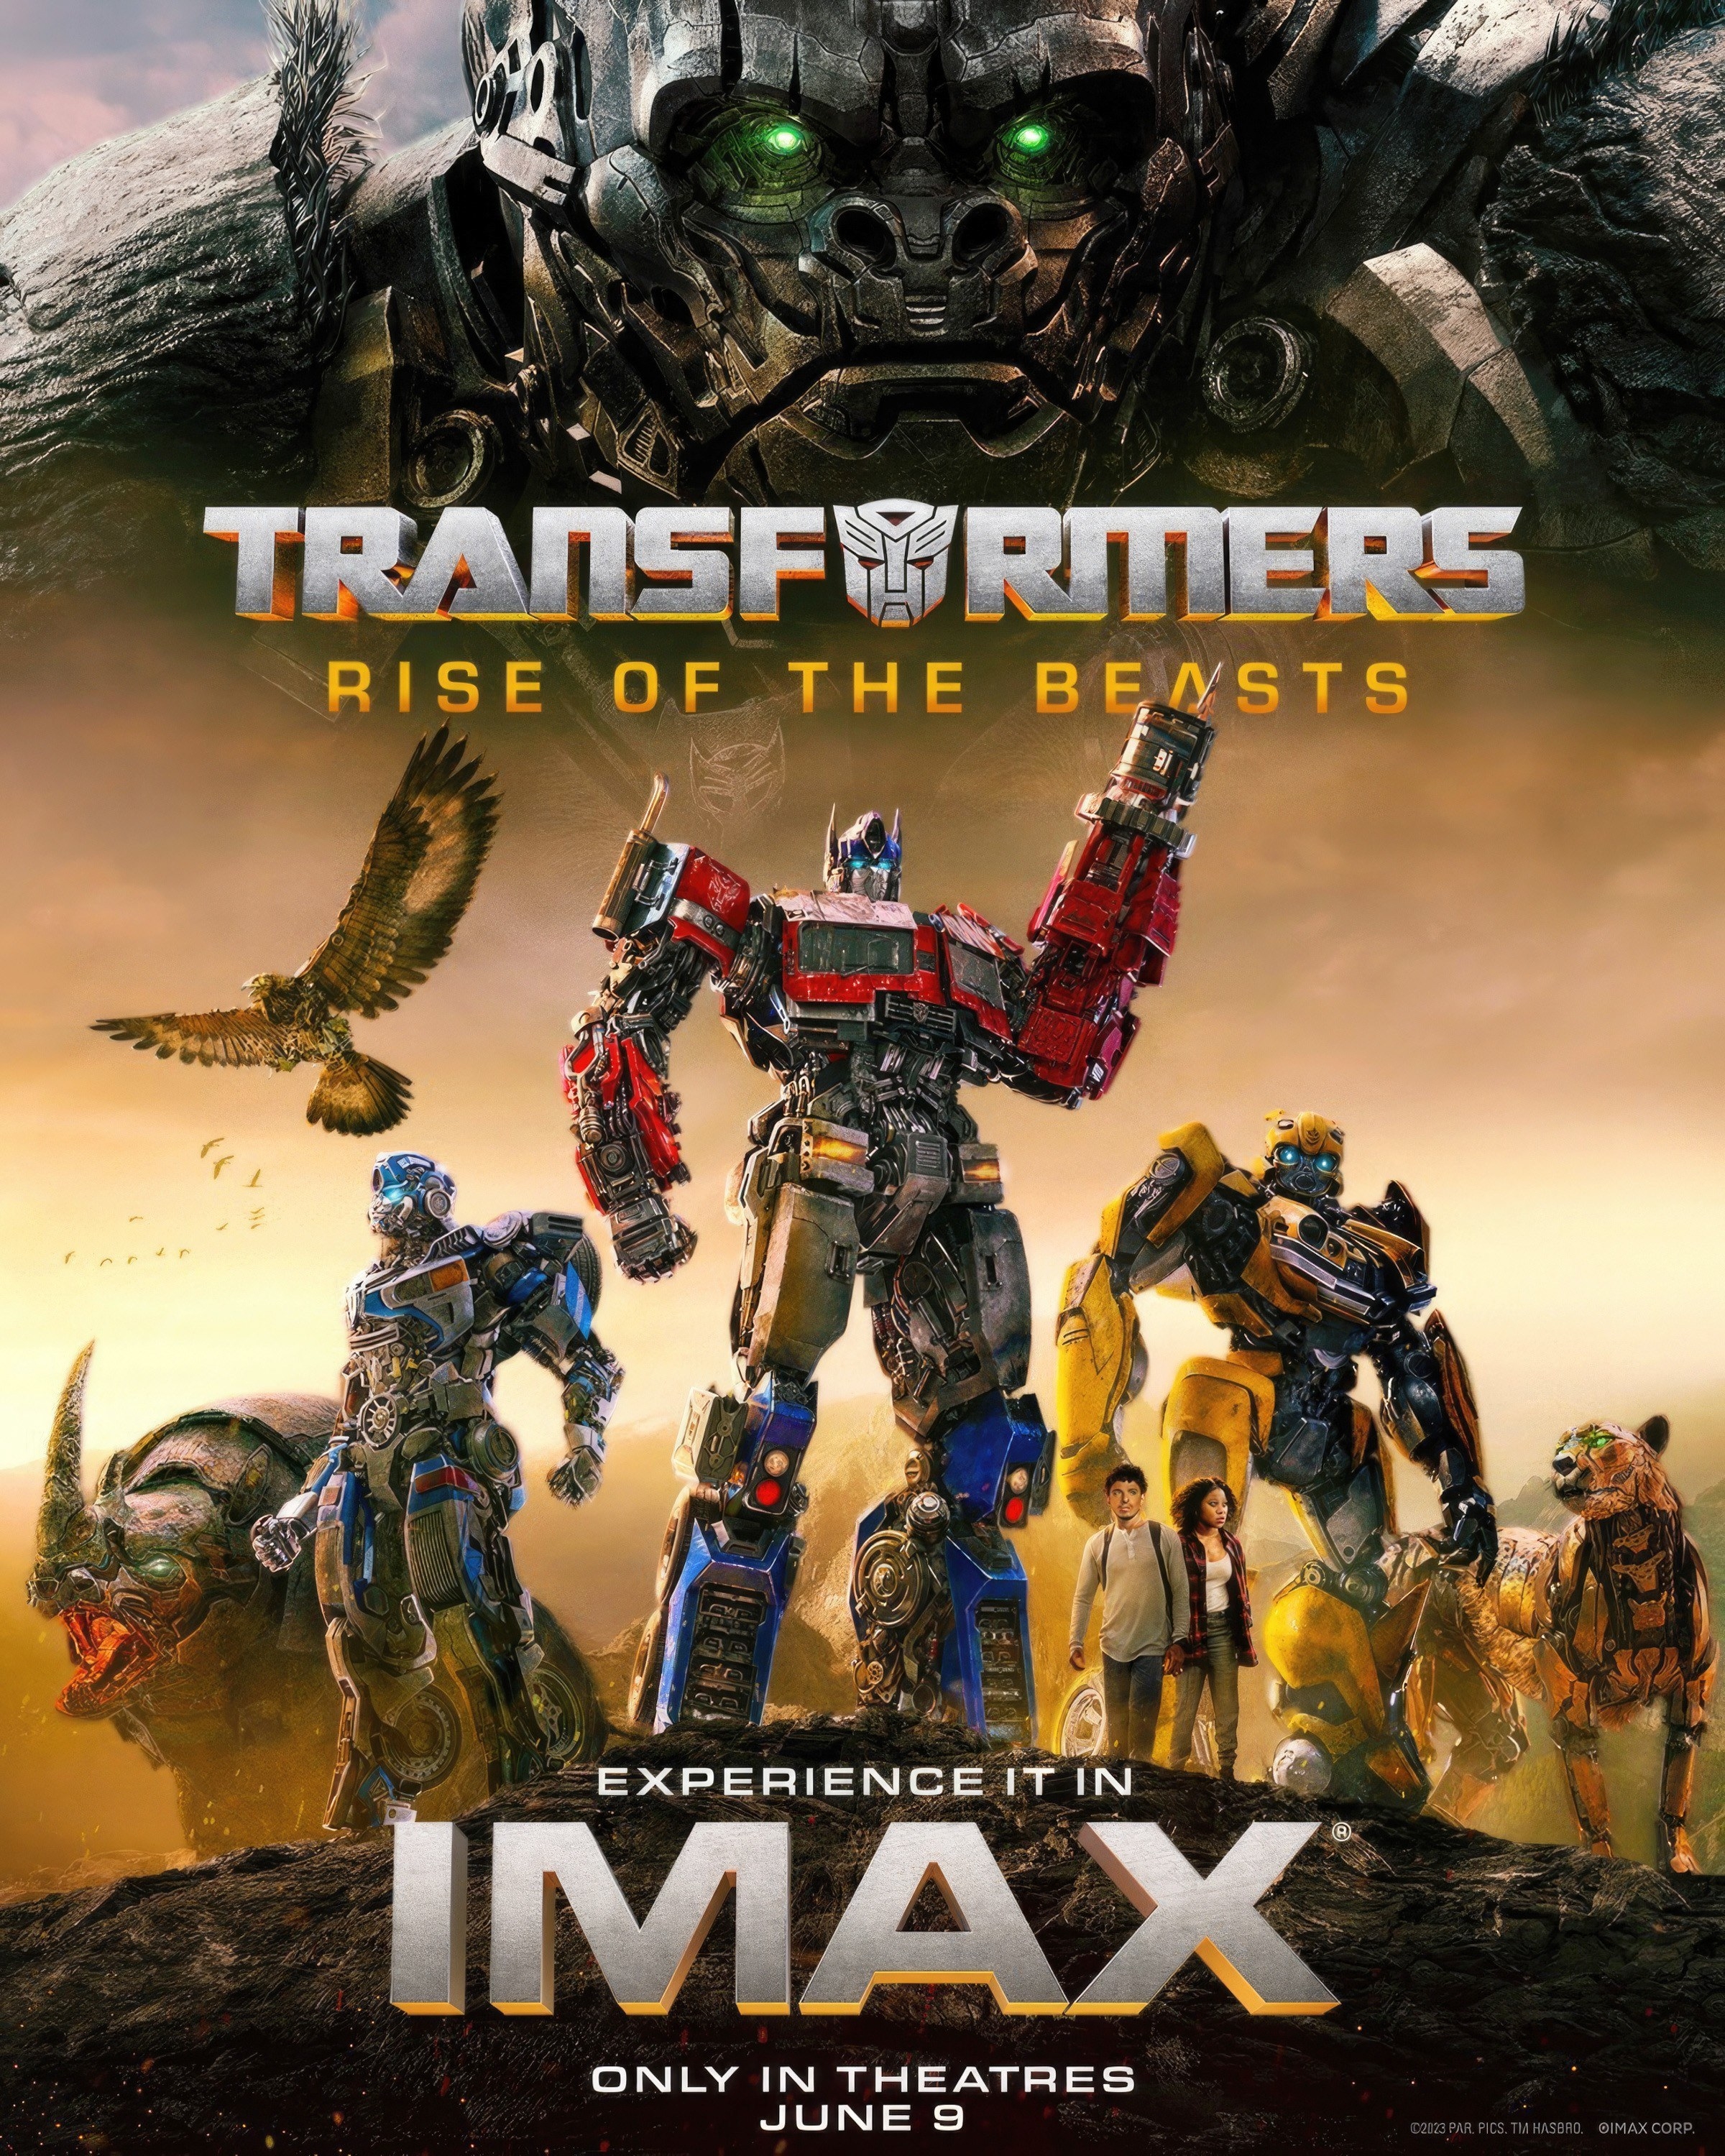 The poster for Transformers